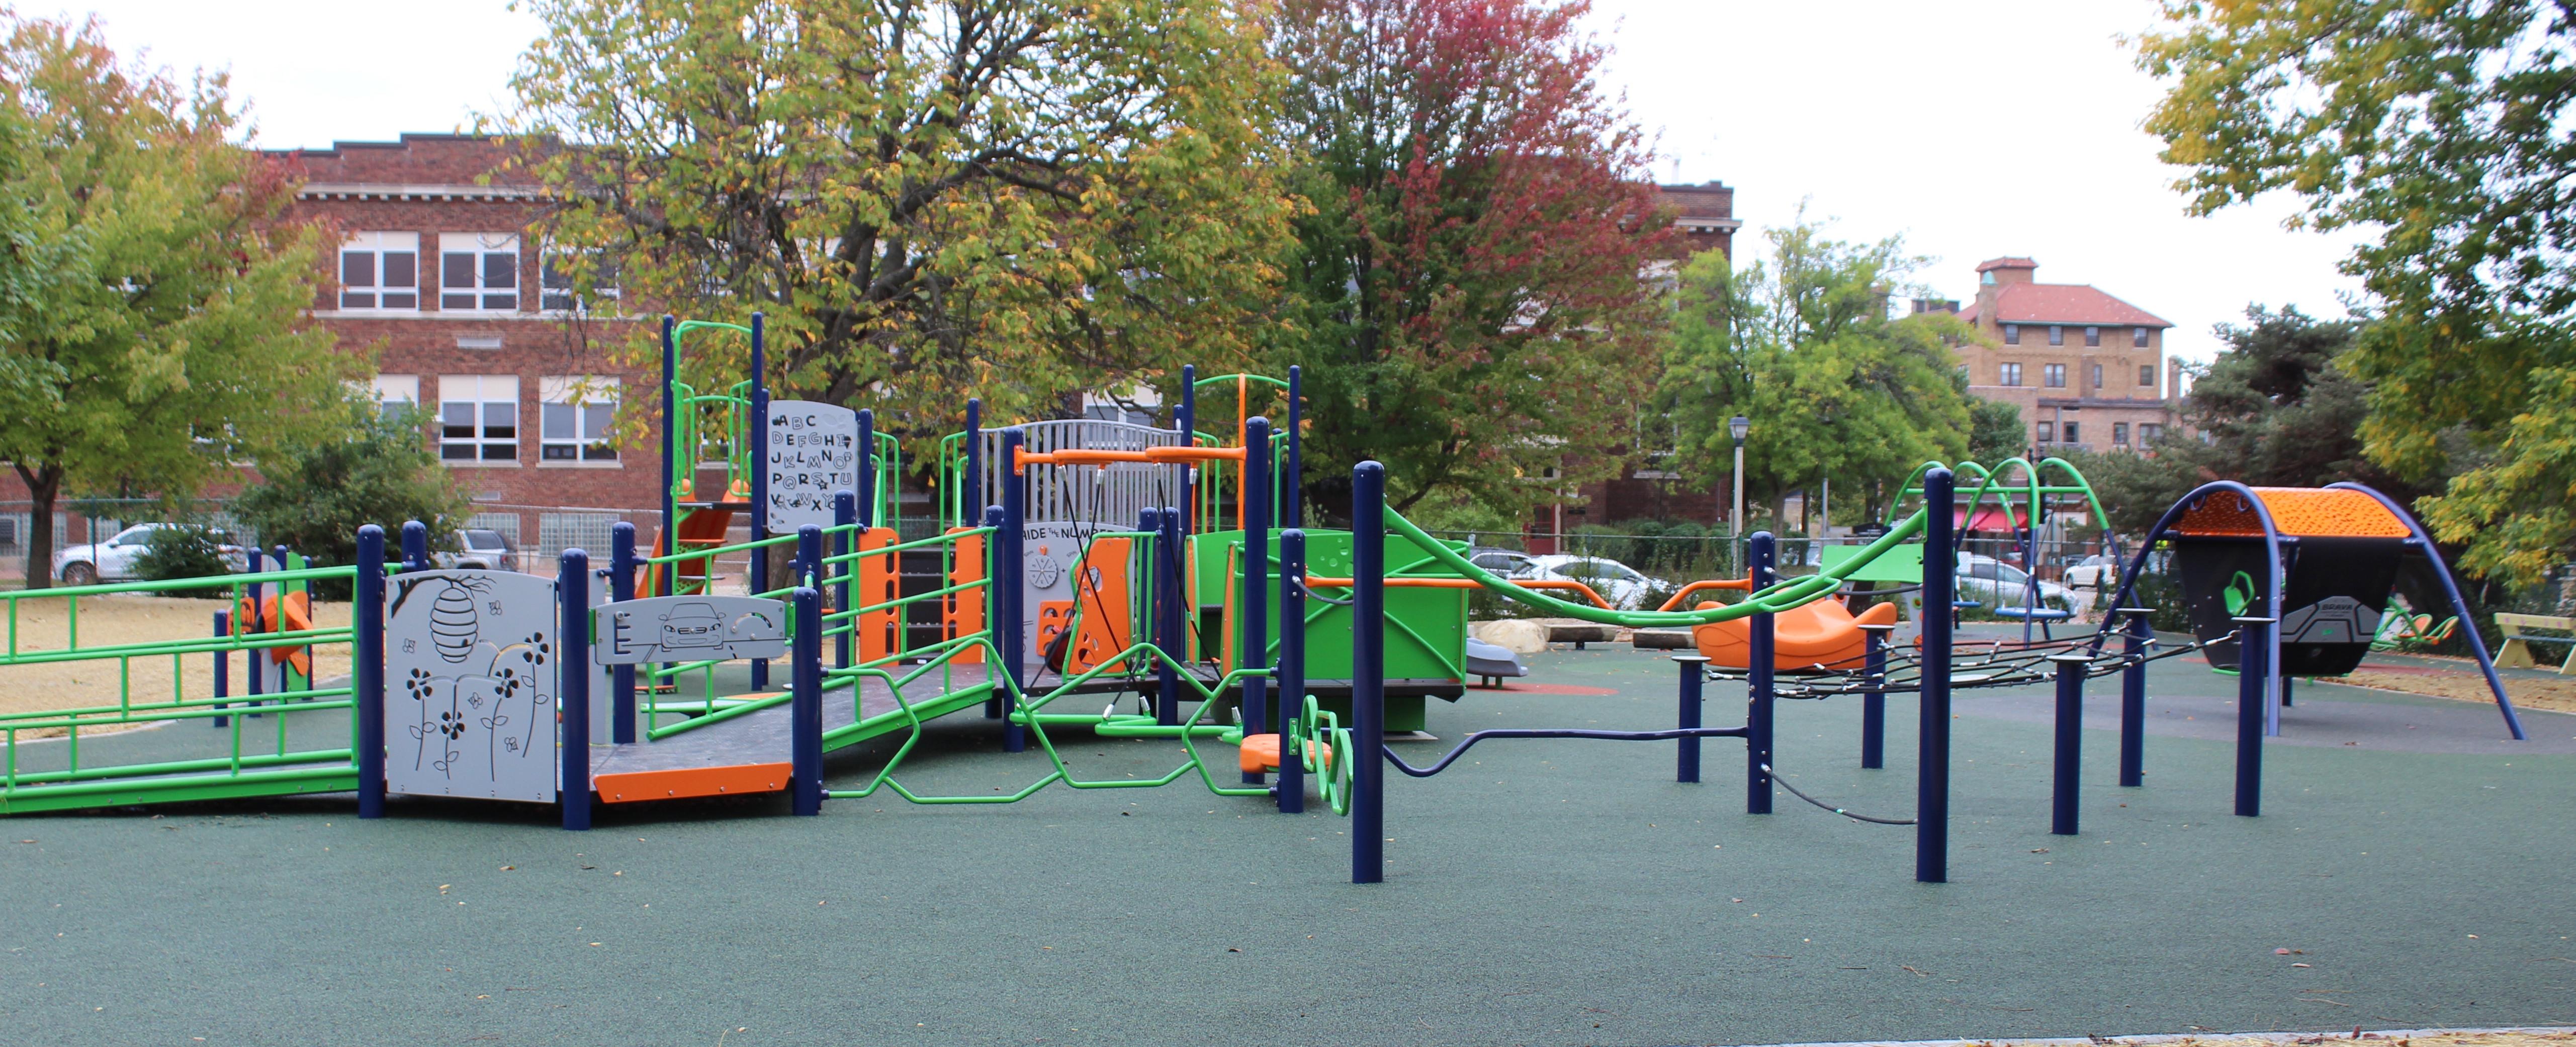 atwater east playground